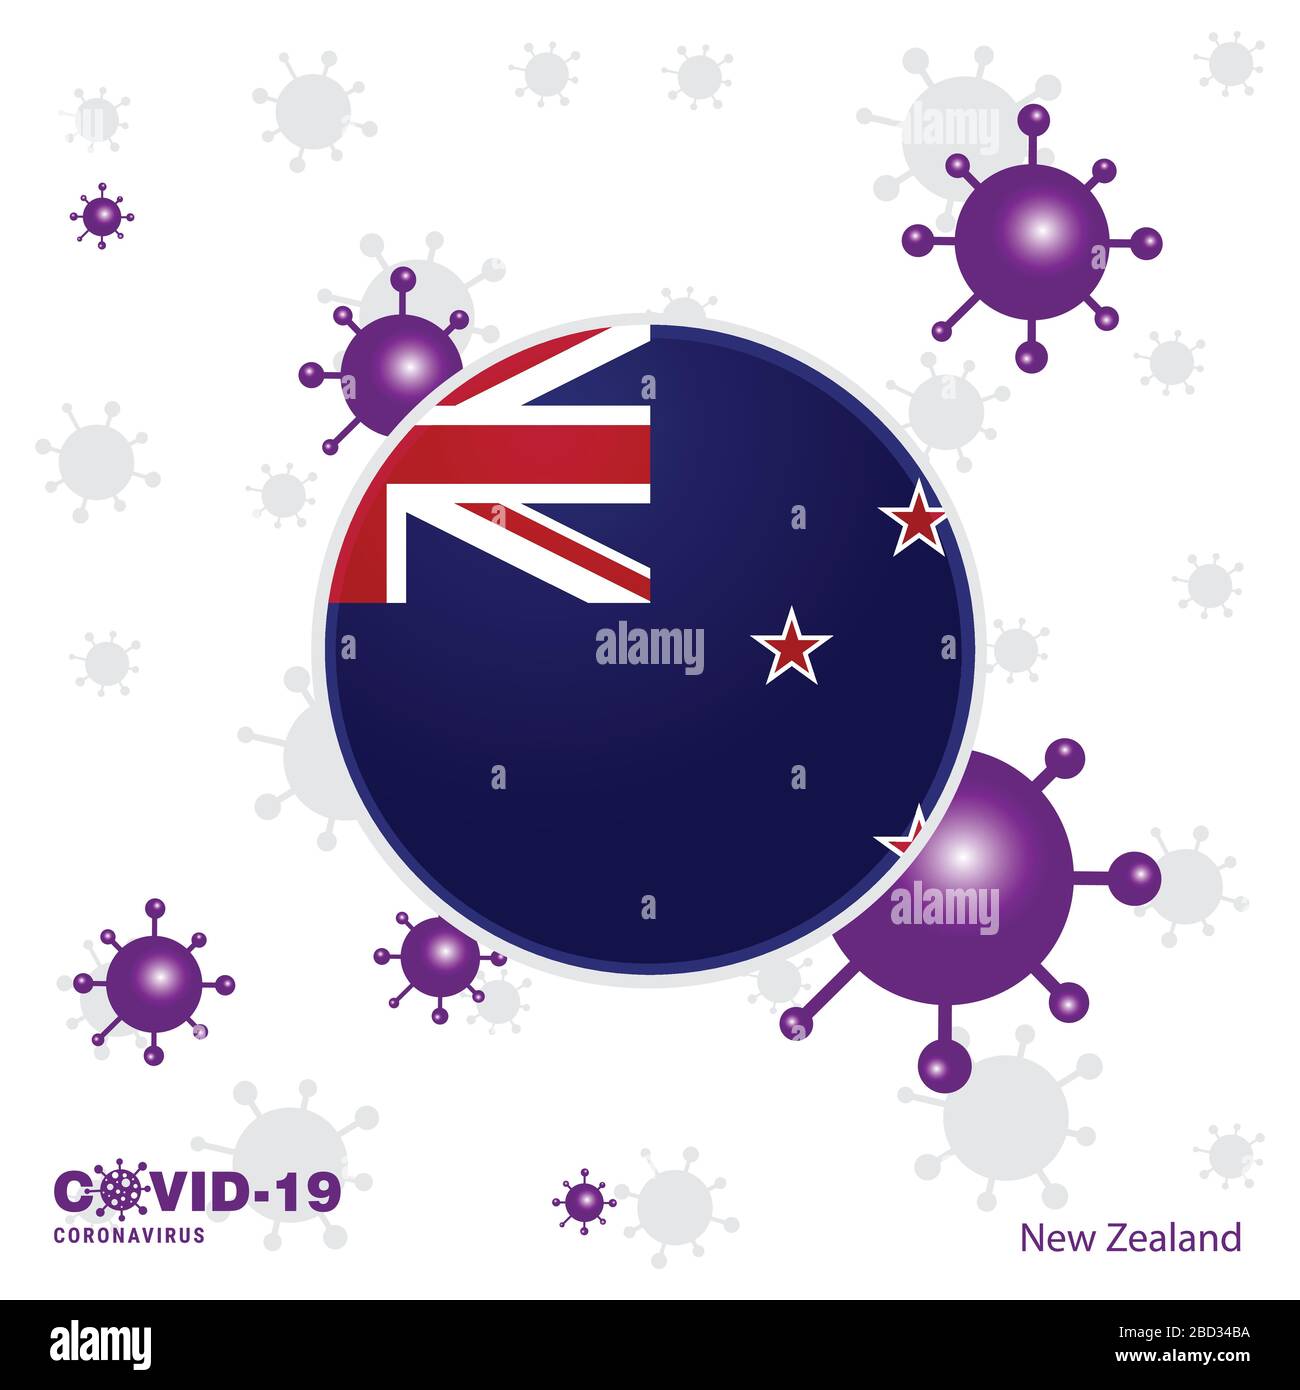 Pray For New Zealand. COVID-19 Coronavirus Typography Flag. Stay home, Stay Healthy. Take care of your own health Stock Vector